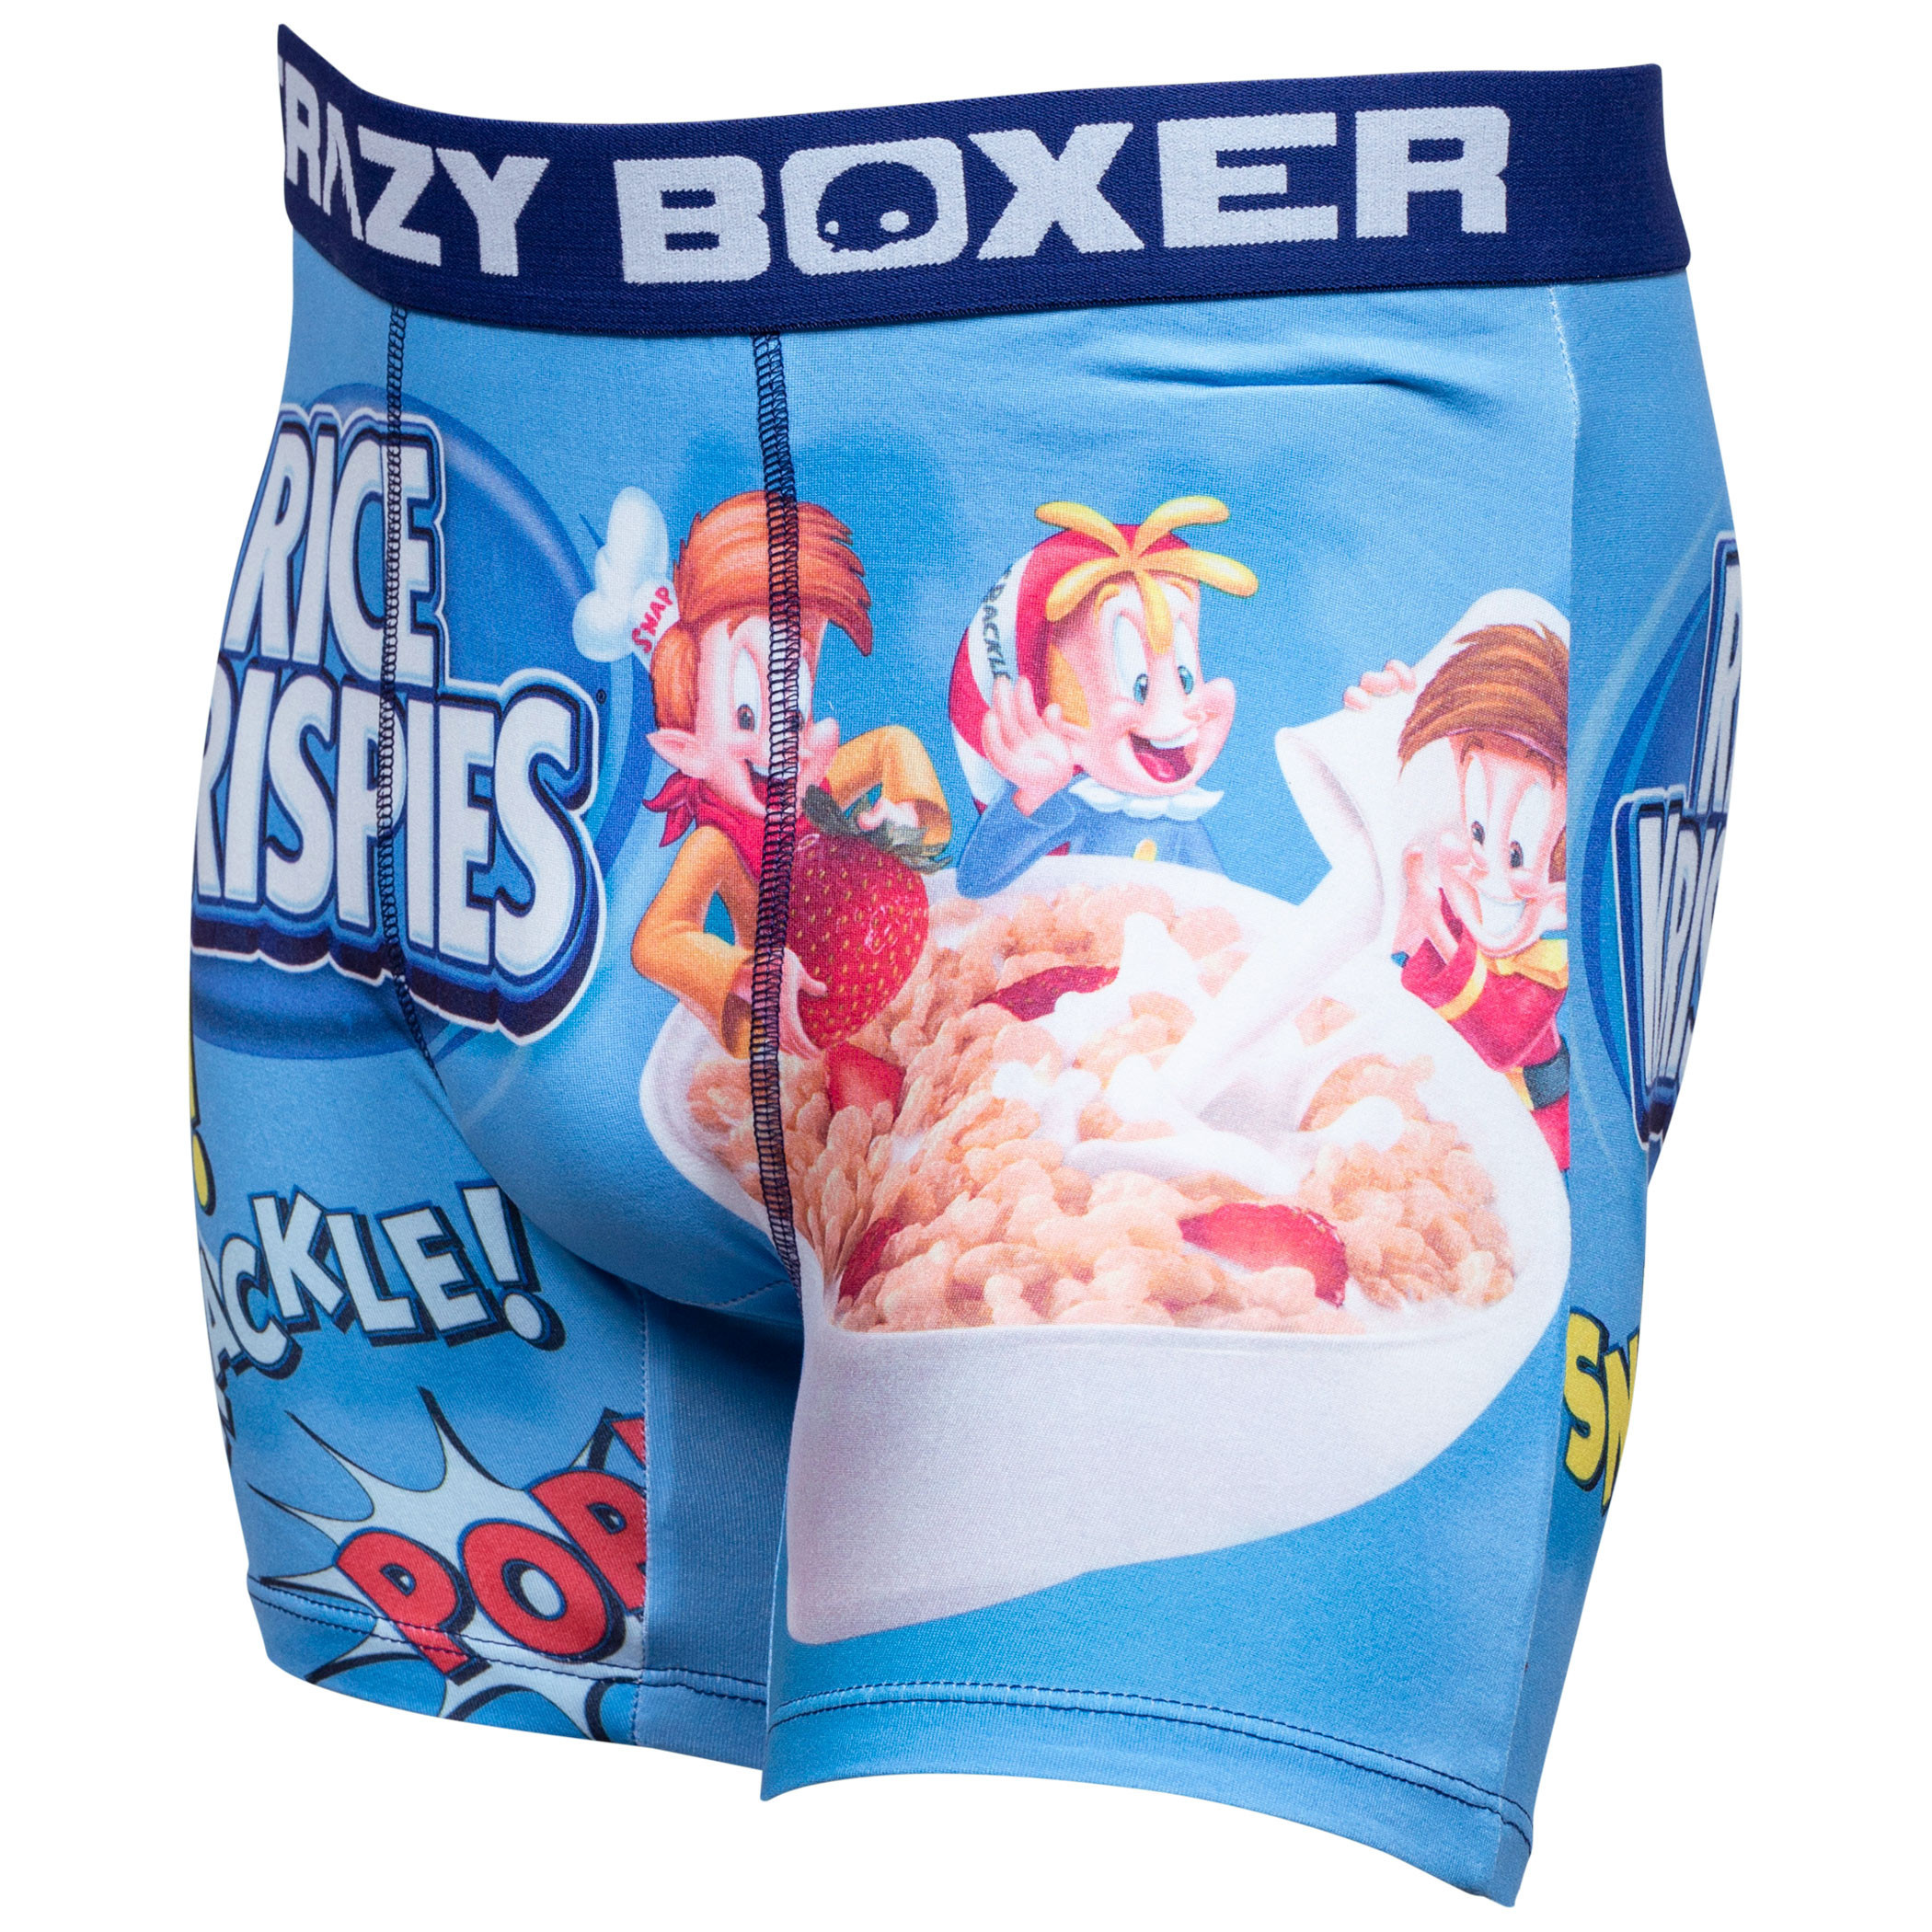 Rice Krispies Boxer Briefs in Cereal Box